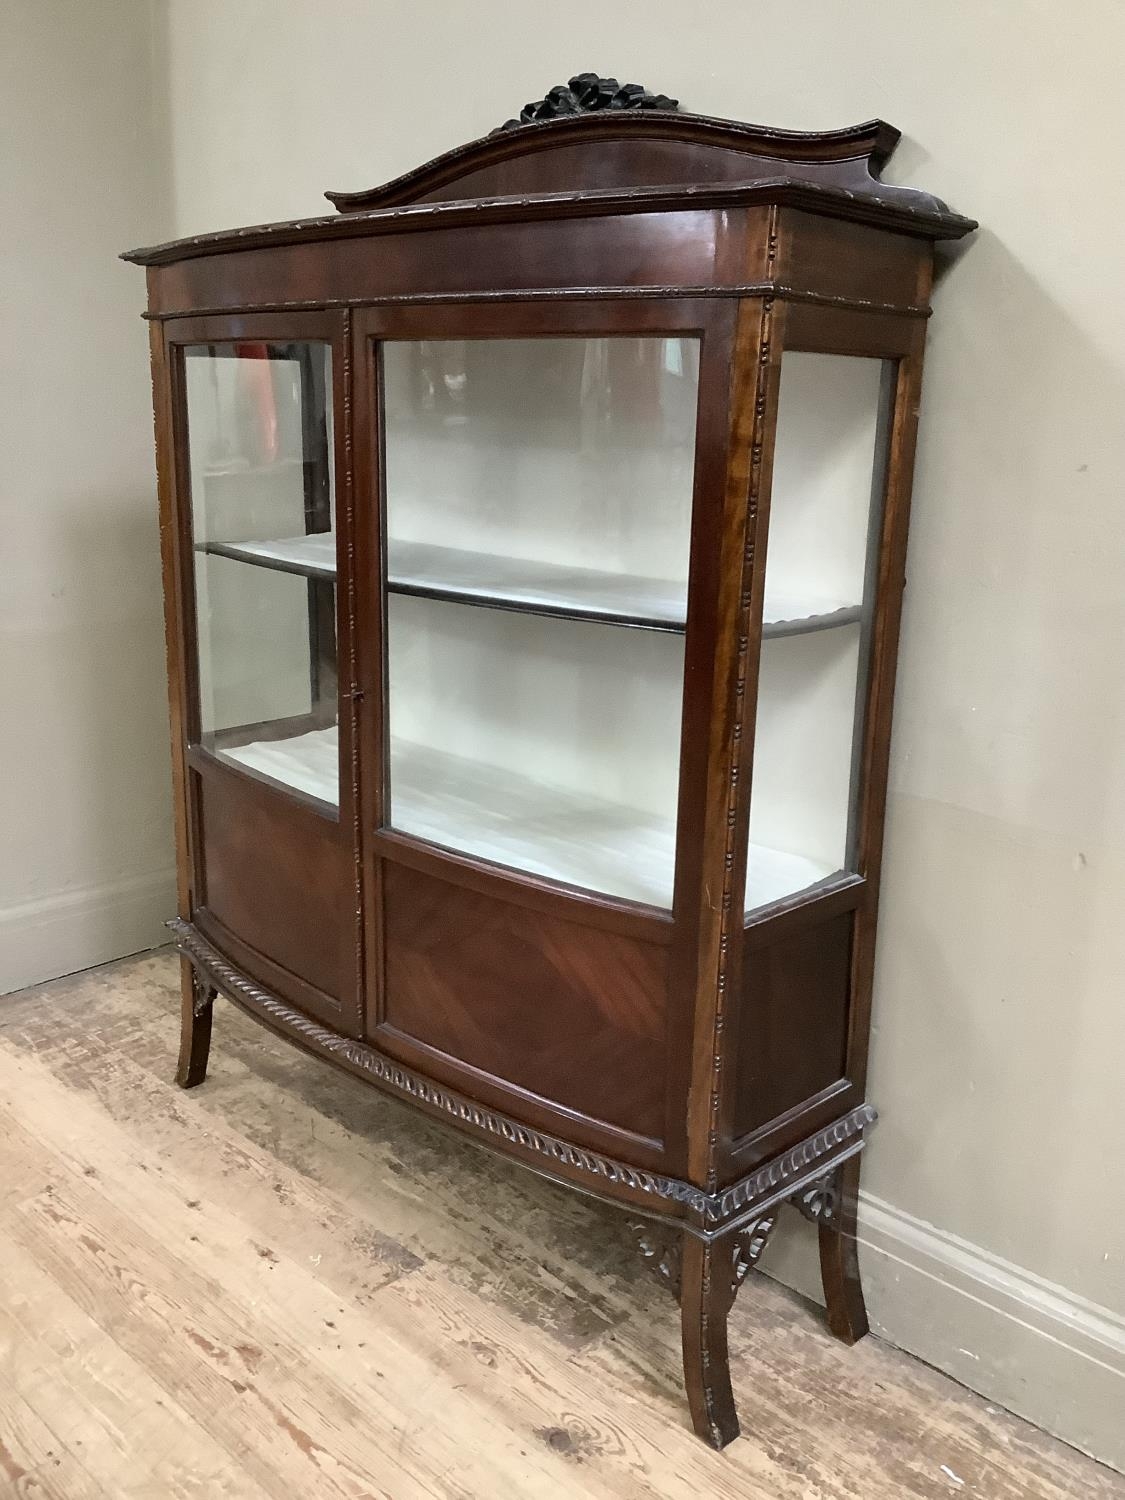 An Edwardian mahogany double bow fronted cabinet with glazed doors over three internal shelves, - Image 2 of 2